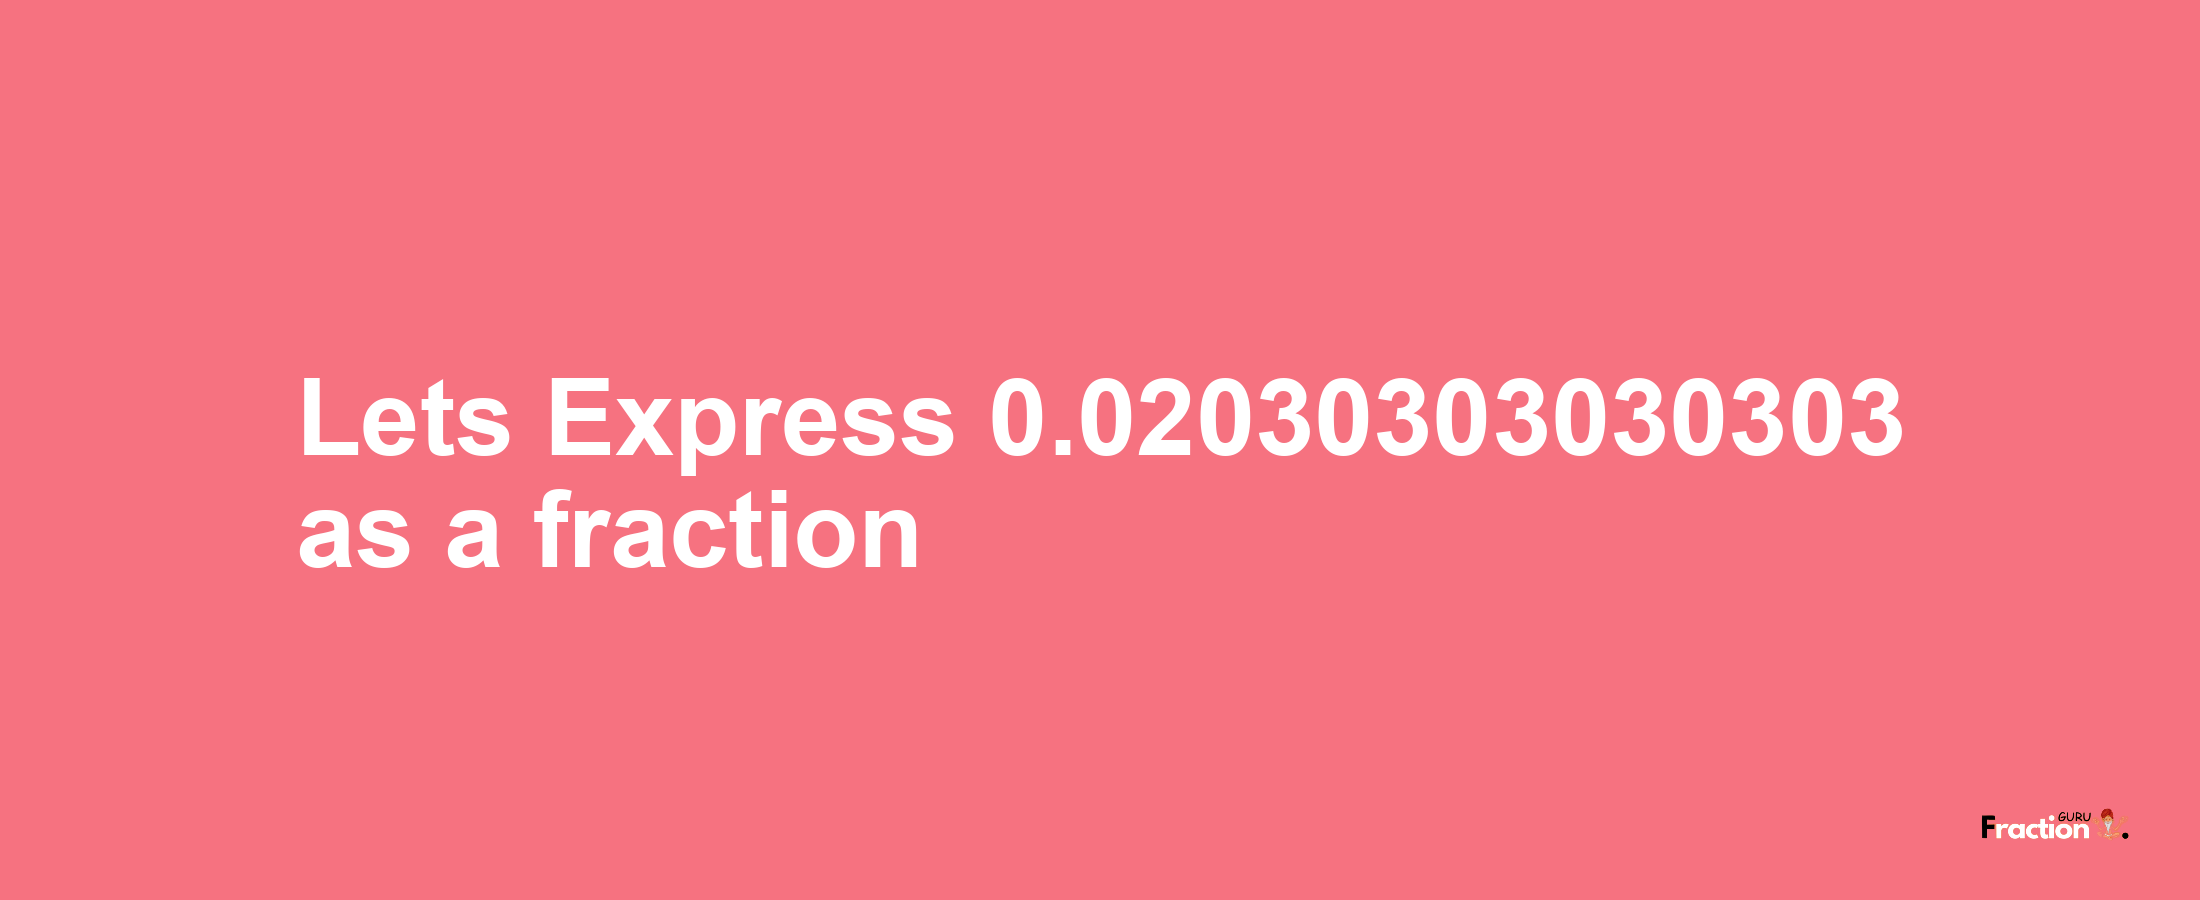 Lets Express 0.02030303030303 as afraction